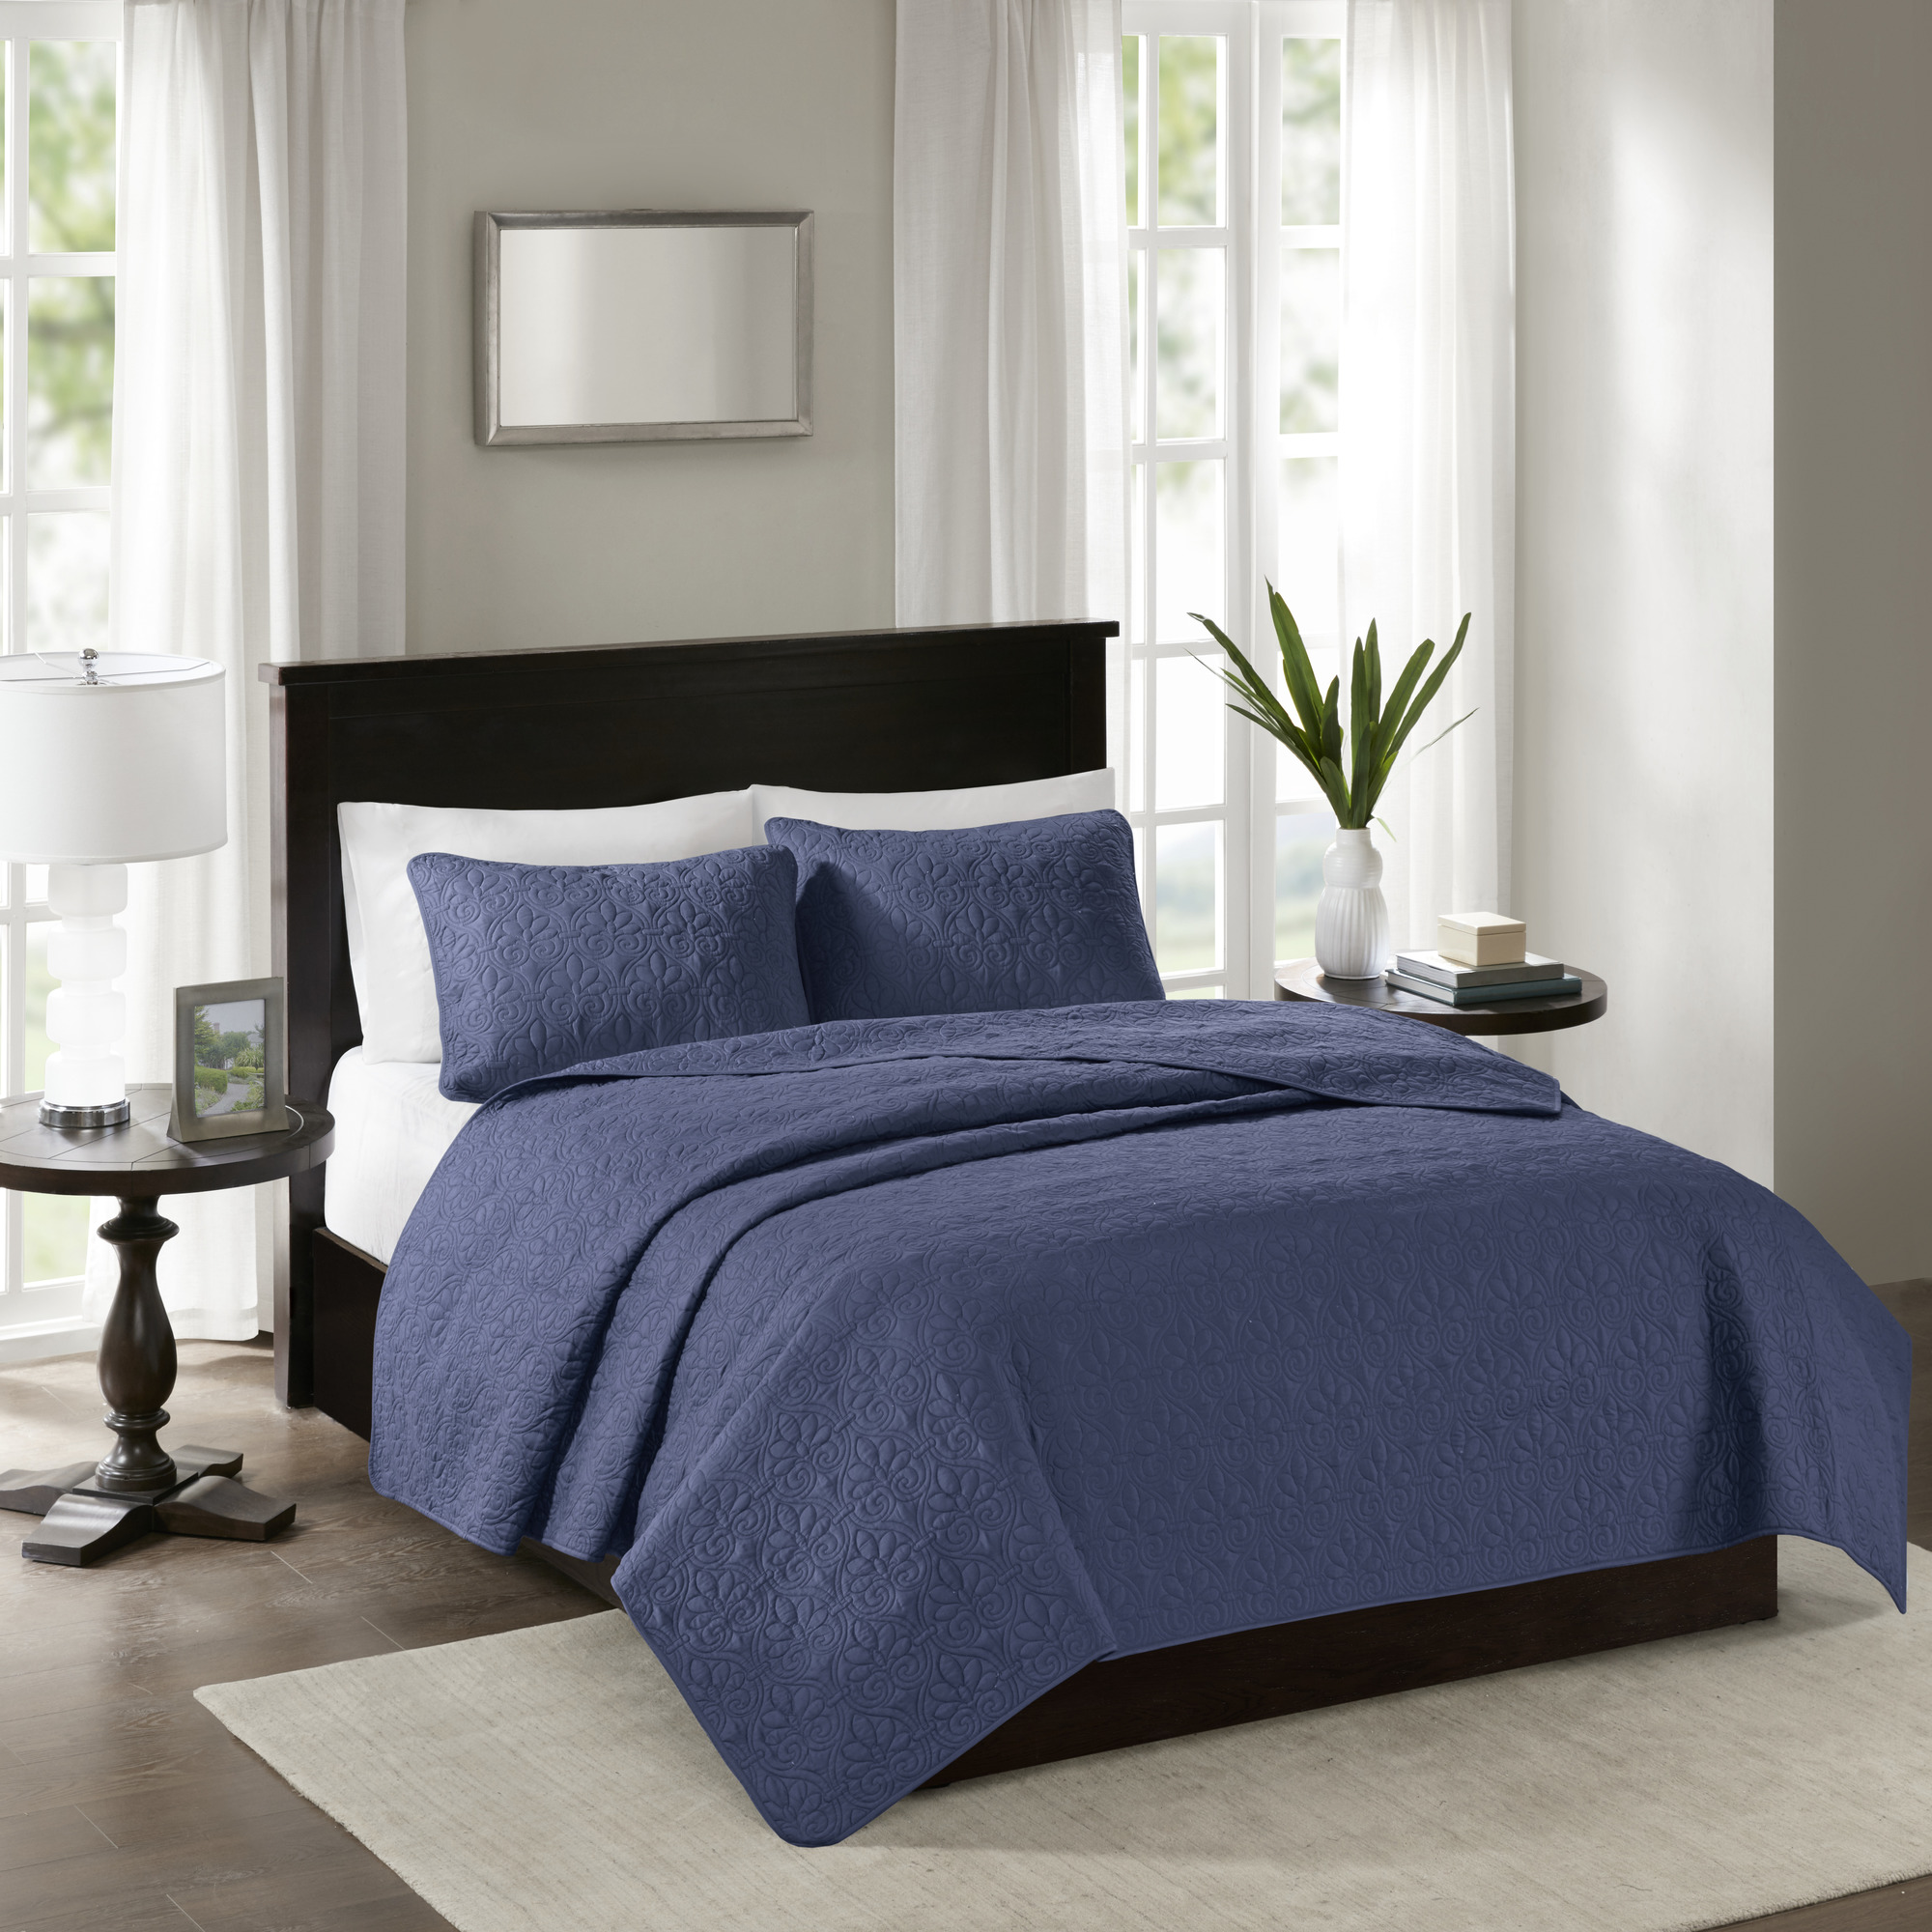 Home Essence Vancouver Super Soft Reversible Coverlet Set, Twin/Twin XL, Navy - image 3 of 13